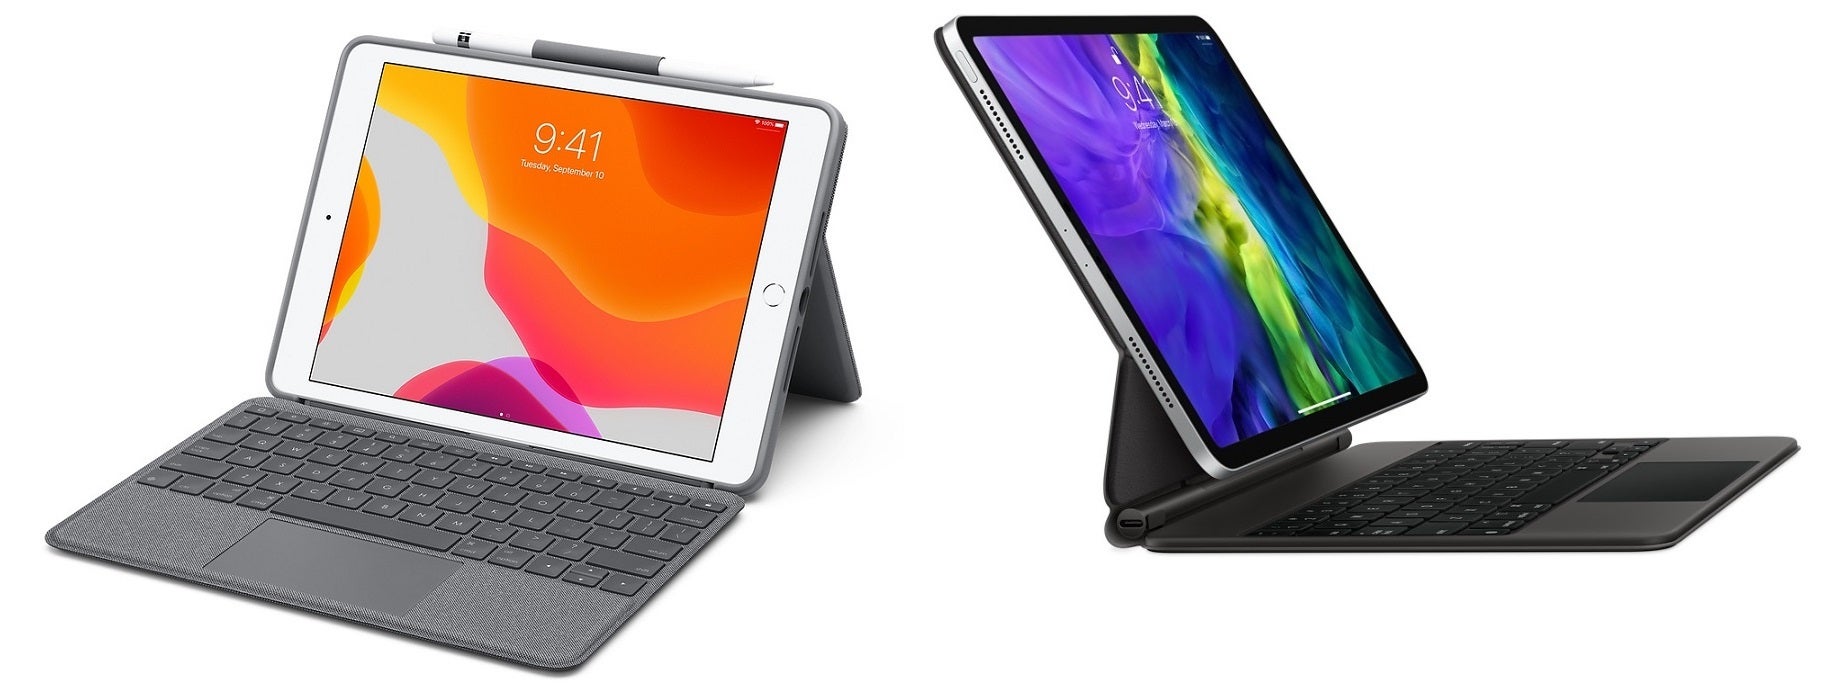 The iPad 8 with Logitech&#039;s keyboard and trackpad case (left) versus the iPad Air 4 with Magic Keyboard. - Apple iPad 8 vs iPad Air 4: Which one should you buy?